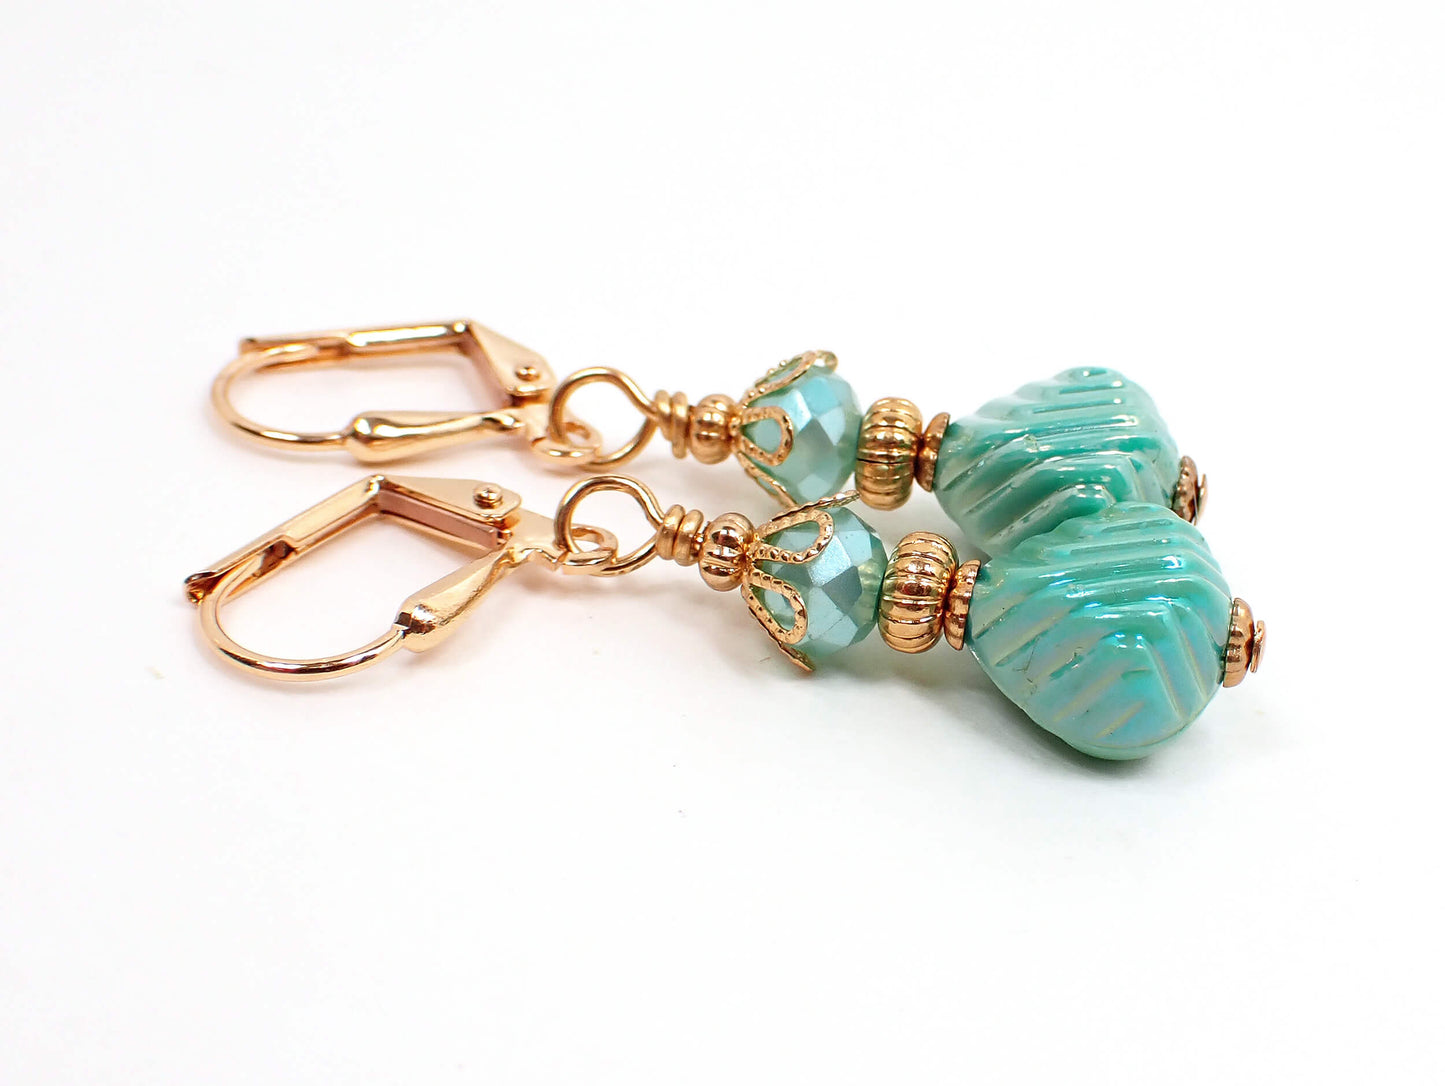 Blue Green Teal Acrylic Handmade Drop Earrings Gold Plated Hook Lever Back or Clip On